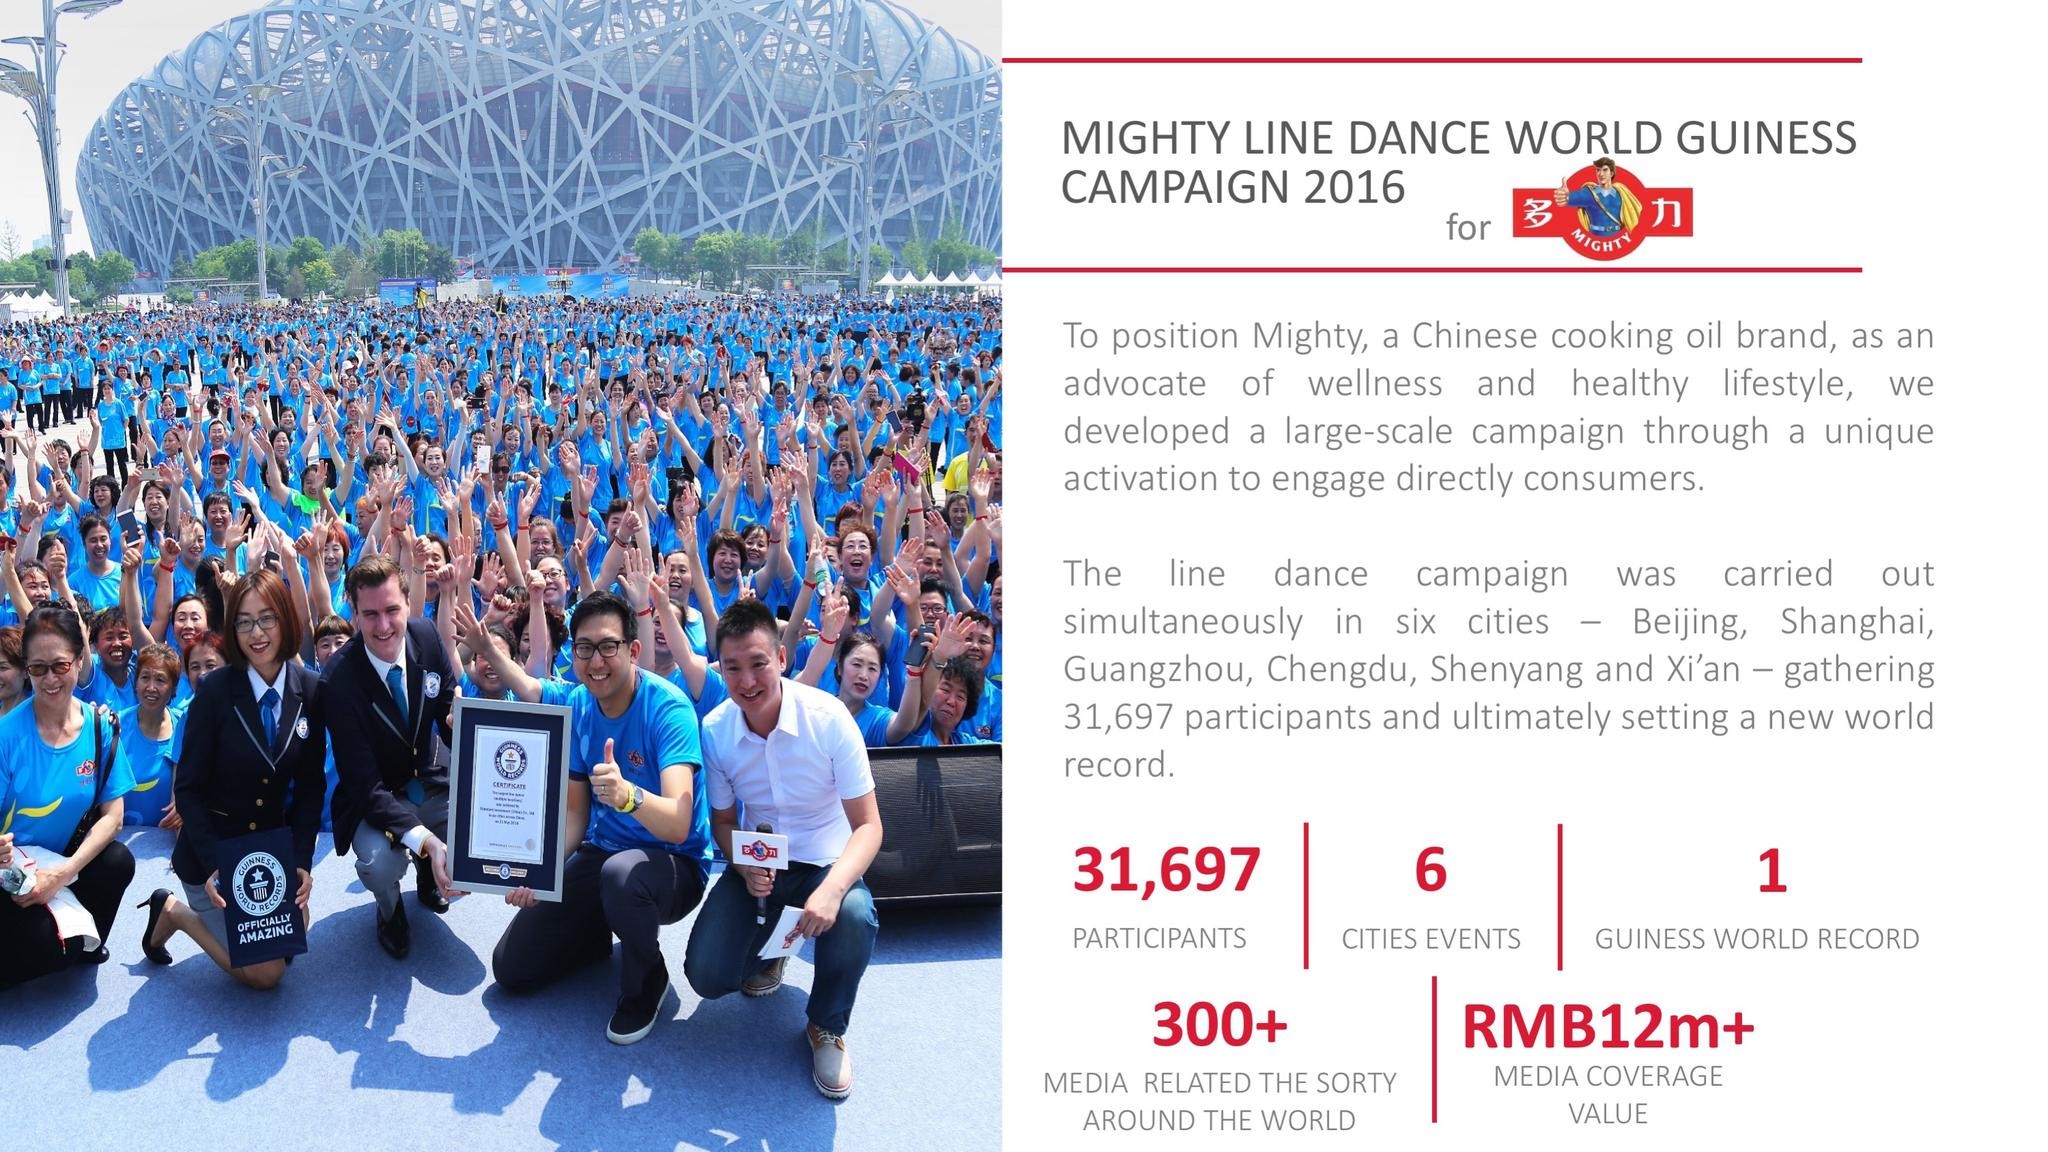 MIGHTY-LINE DANCE GUINNESS WORLD RECORD CAMPAIGN